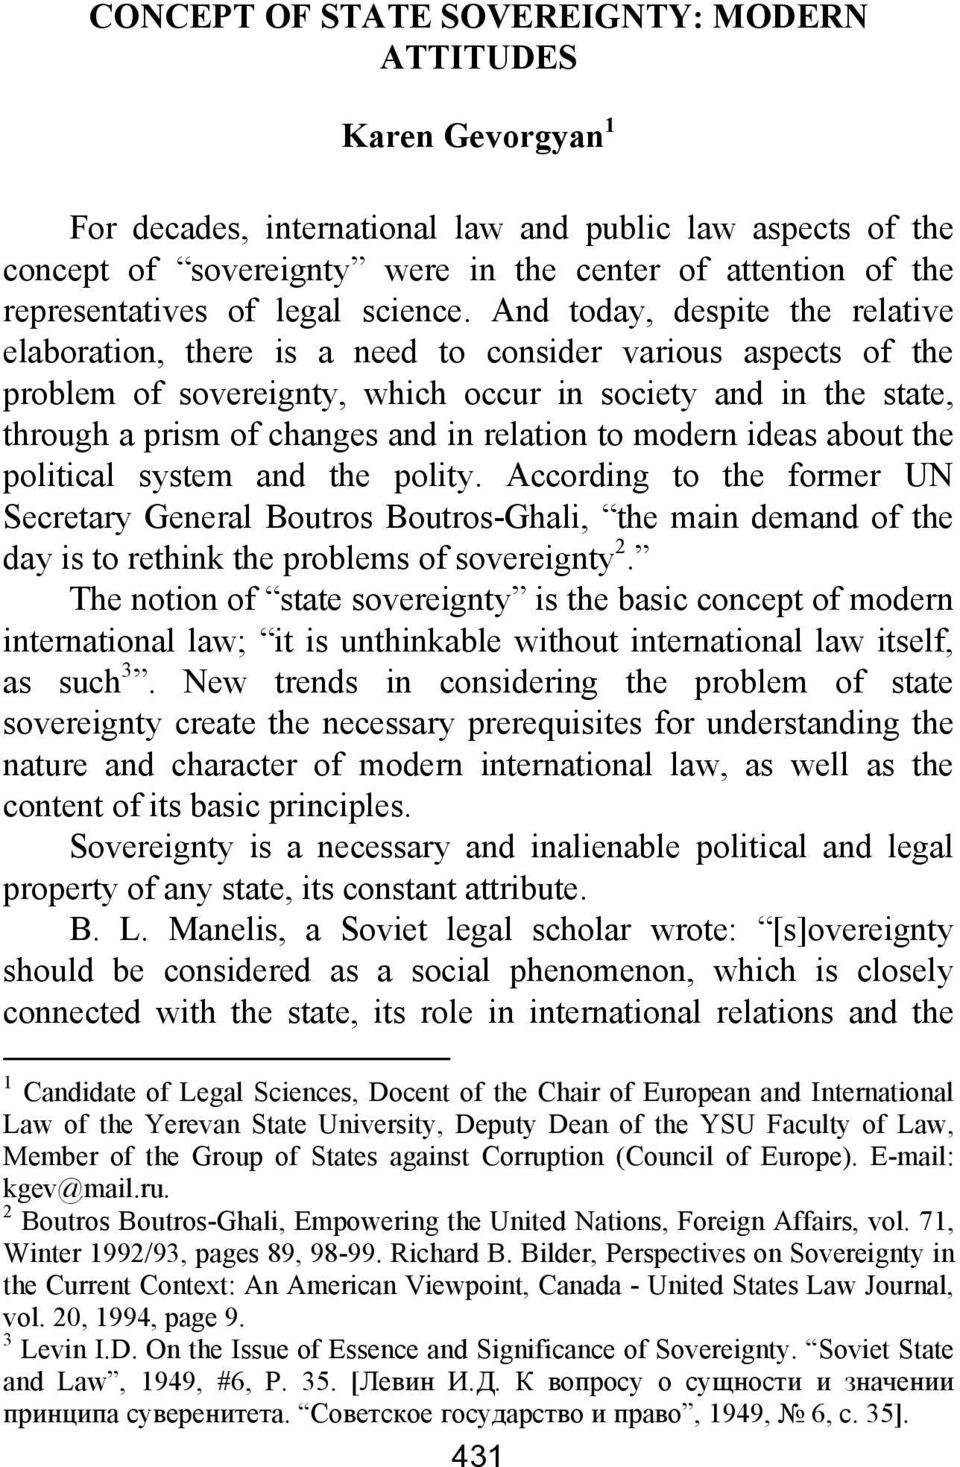 And today, despite the relative elaboration, there is a need to consider various aspects of the problem of sovereignty, which occur in society and in the state, through a prism of changes and in